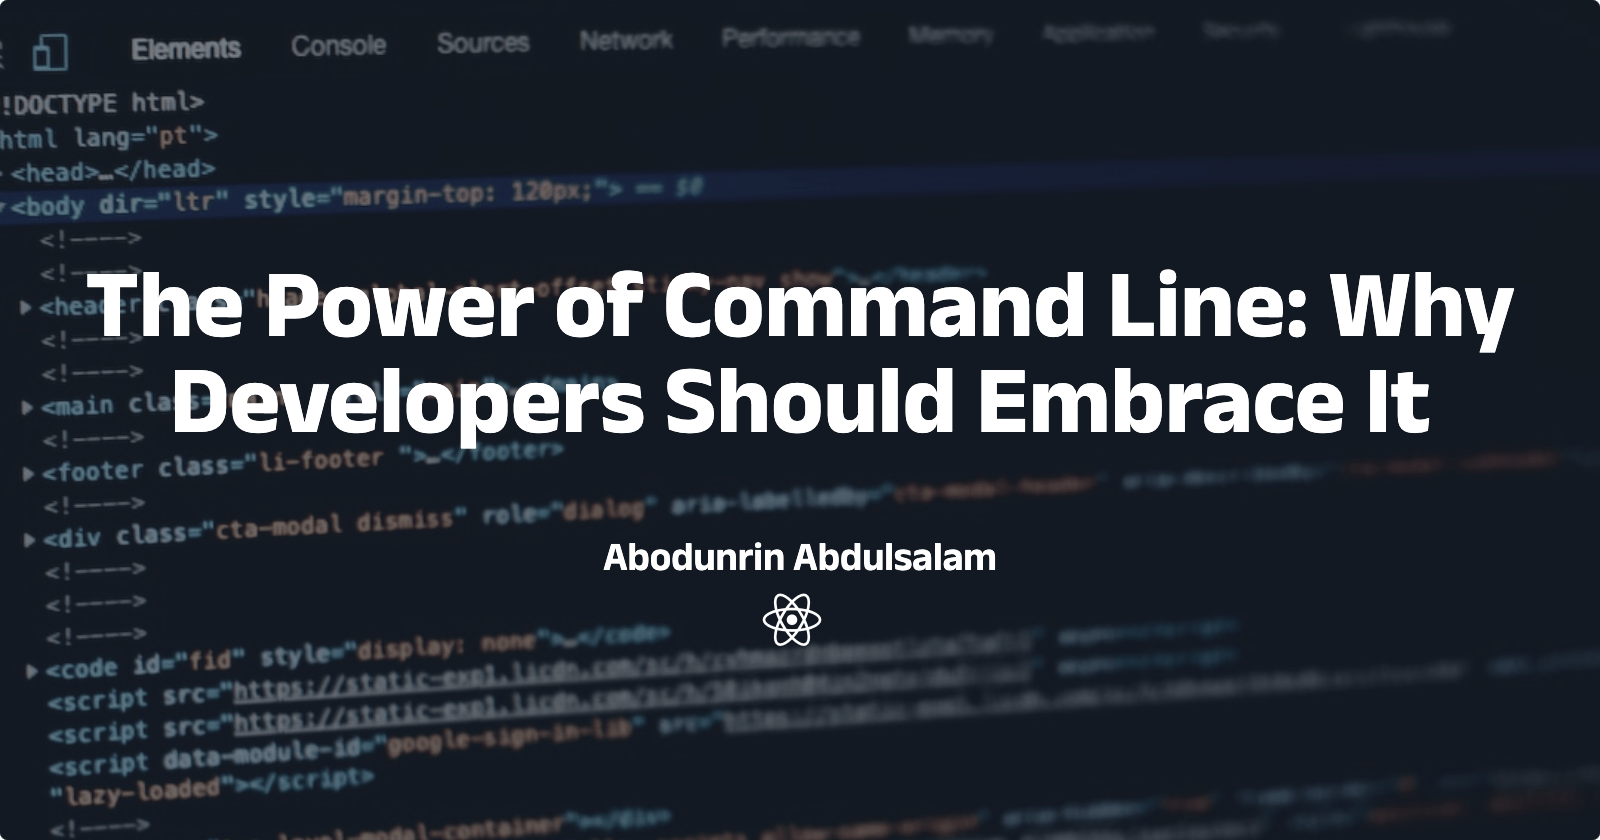 The Power of Command Line: Why Developers Should Embrace It